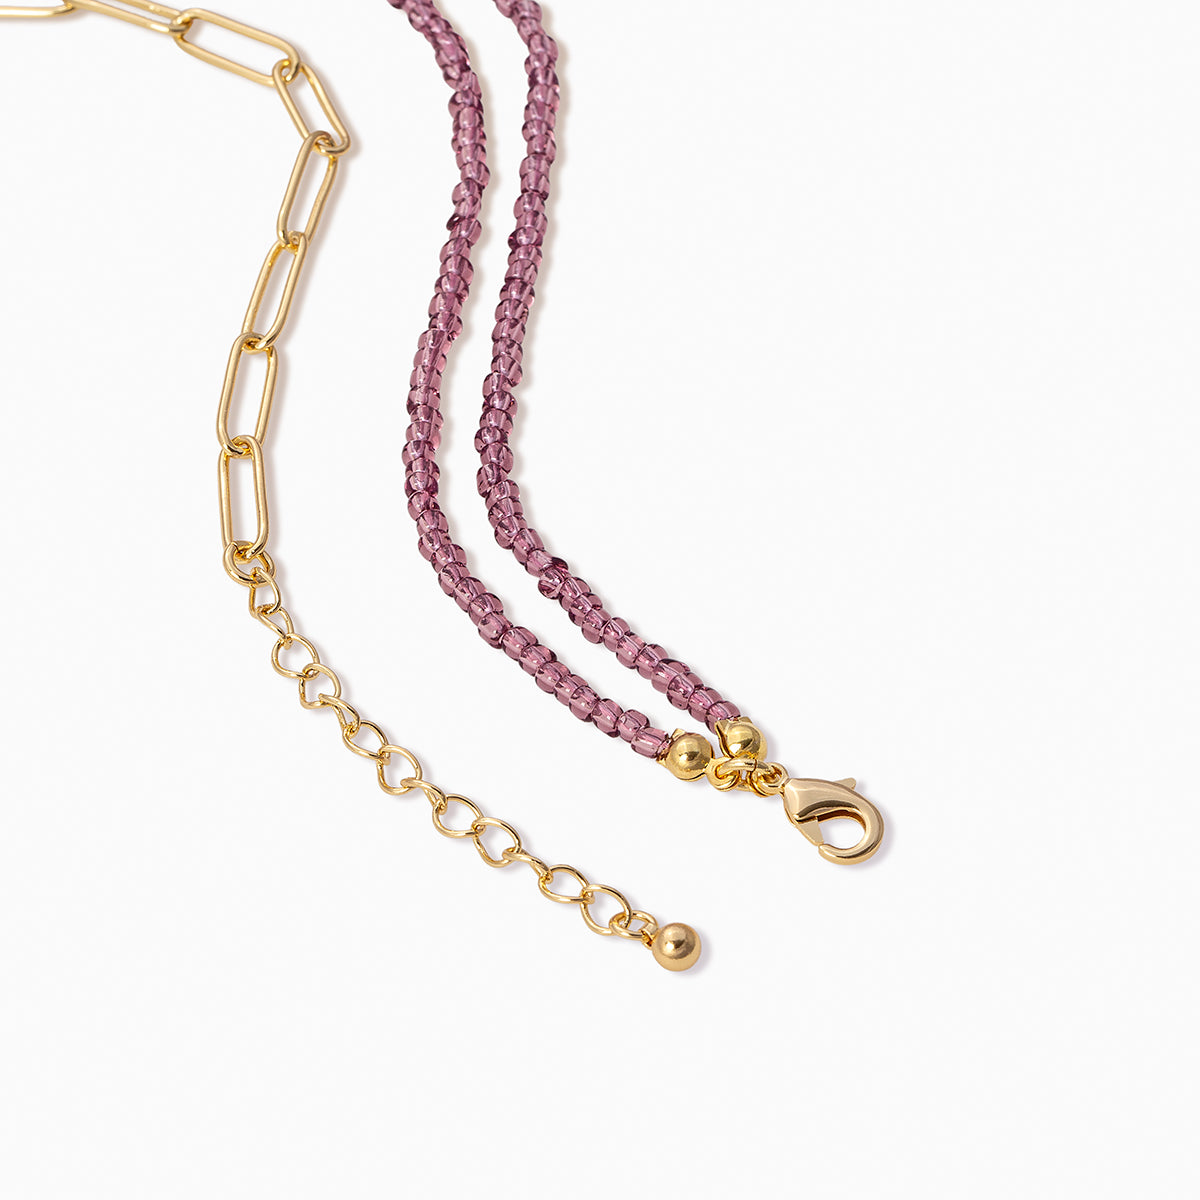 Bead and Chain Necklace | Gold | Product Detail Image 2 | Uncommon James